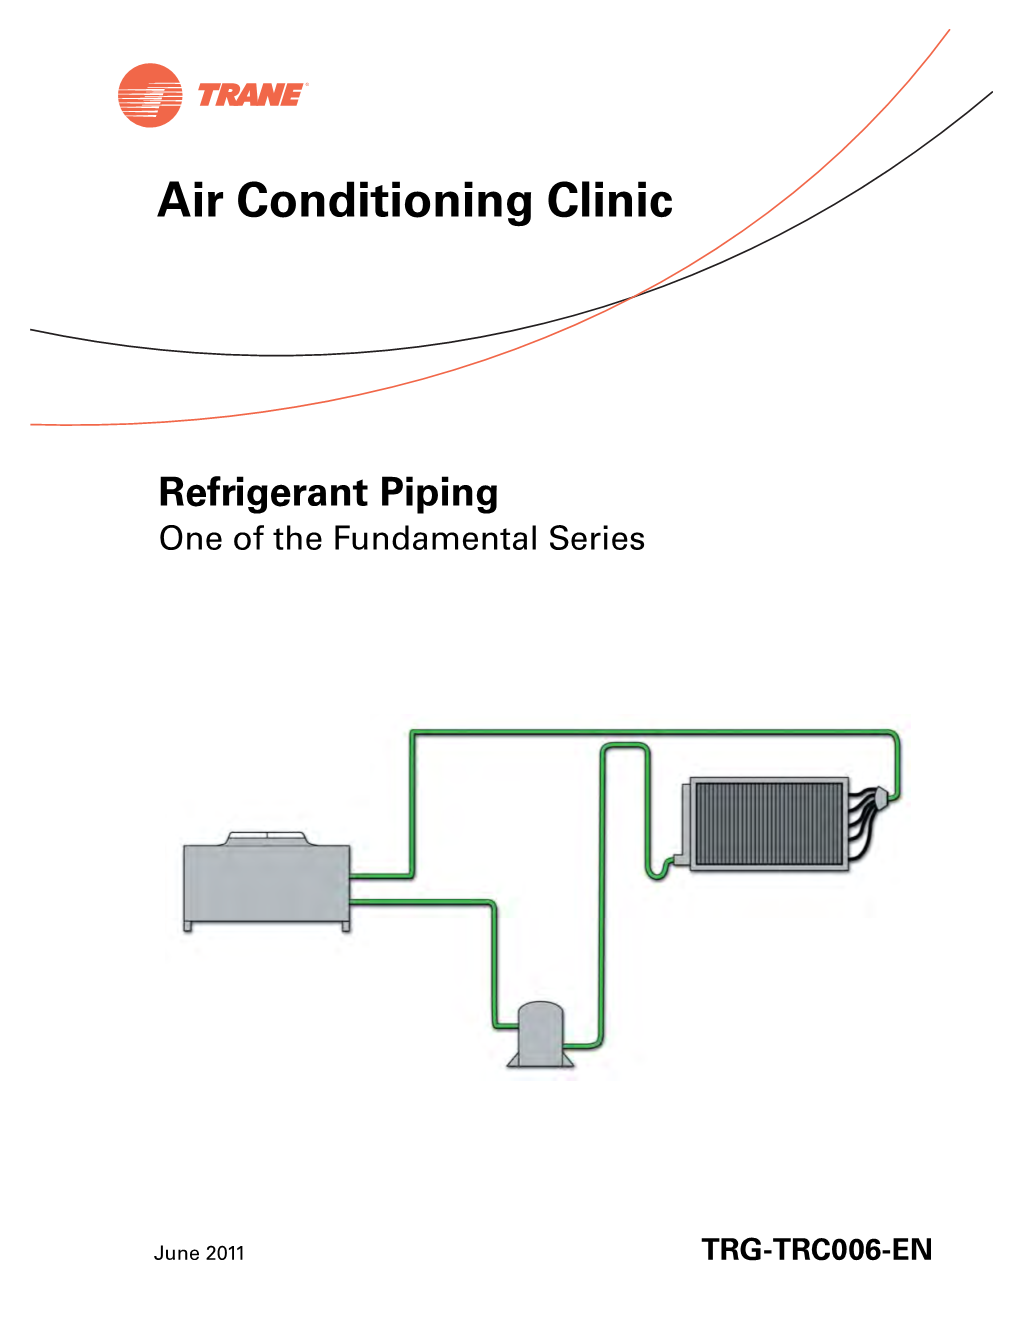 Refrigerant Piping One of the Fundamental Series